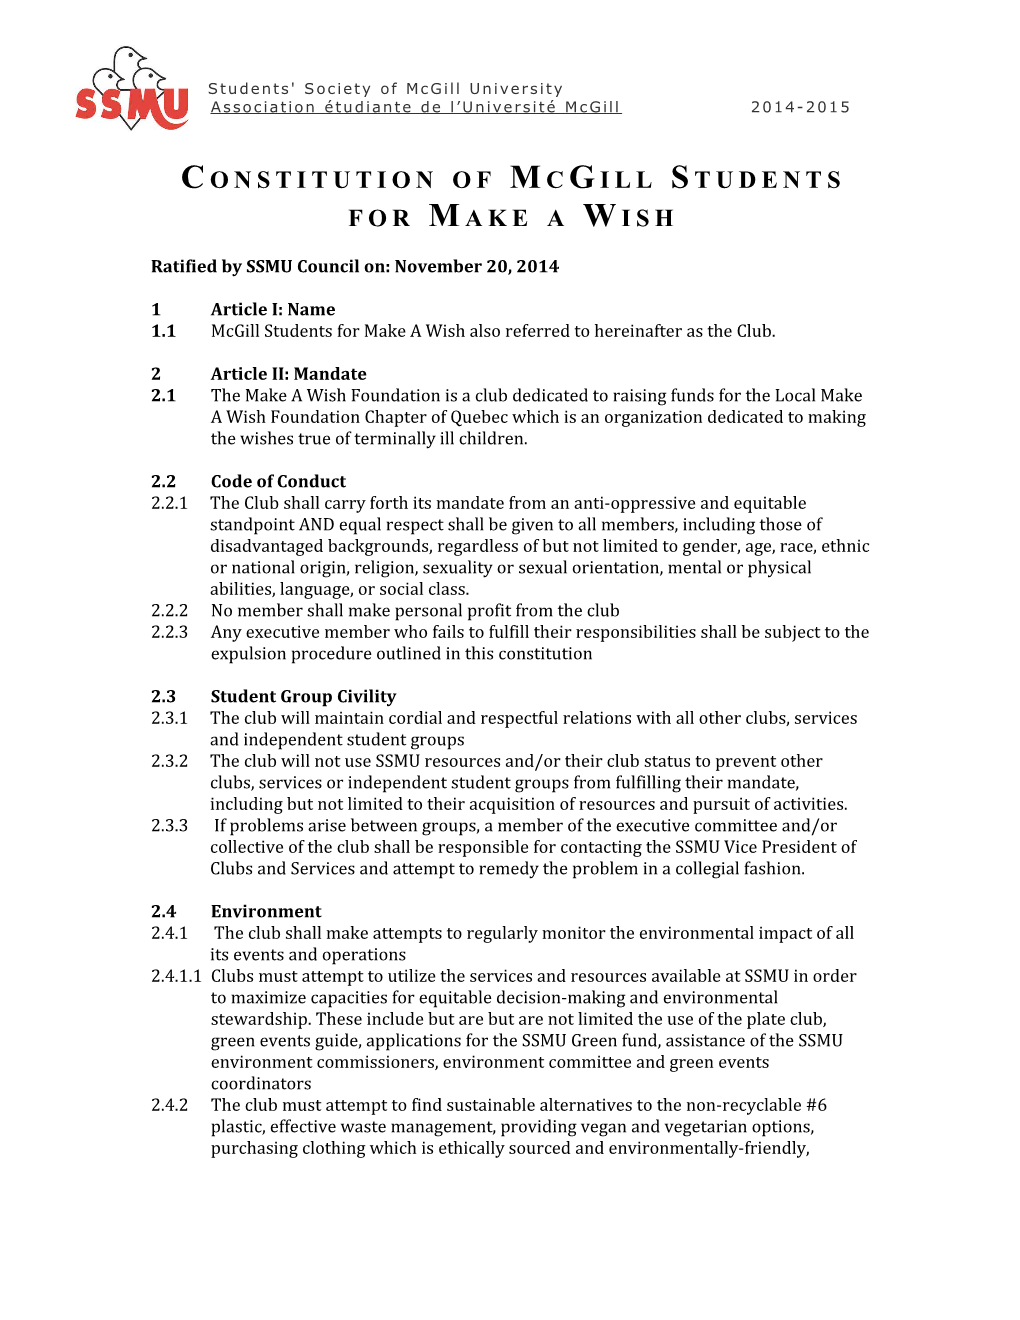 Constitution of Mcgill Students for Make a Wish